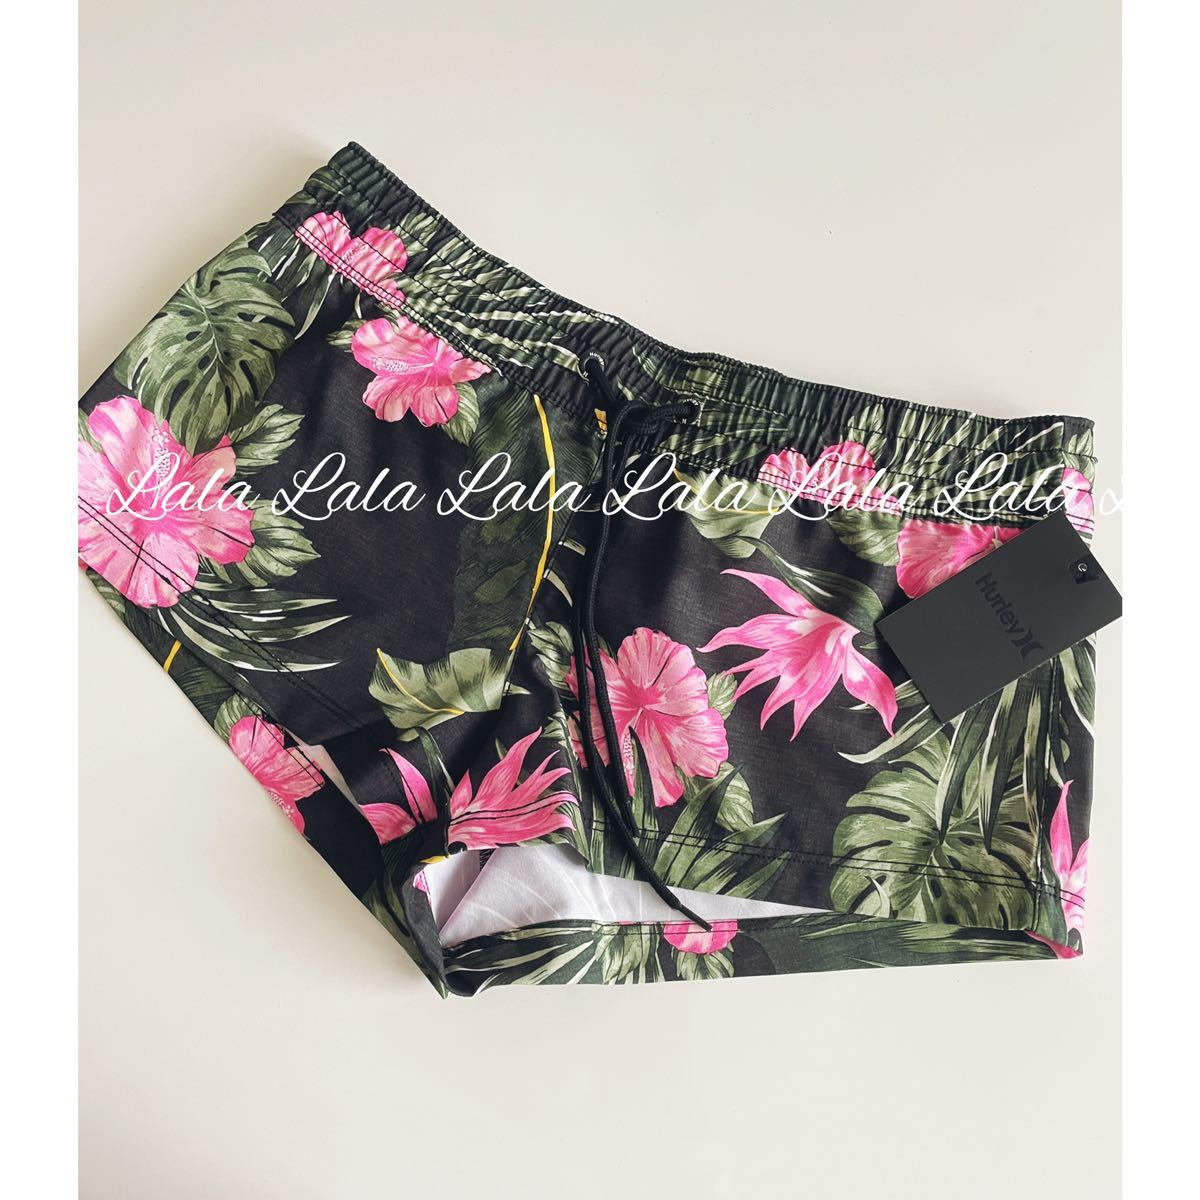  new goods Hurley Harley board shorts Rush Guard, trunks, lady's, show bread, pants, swimsuit 